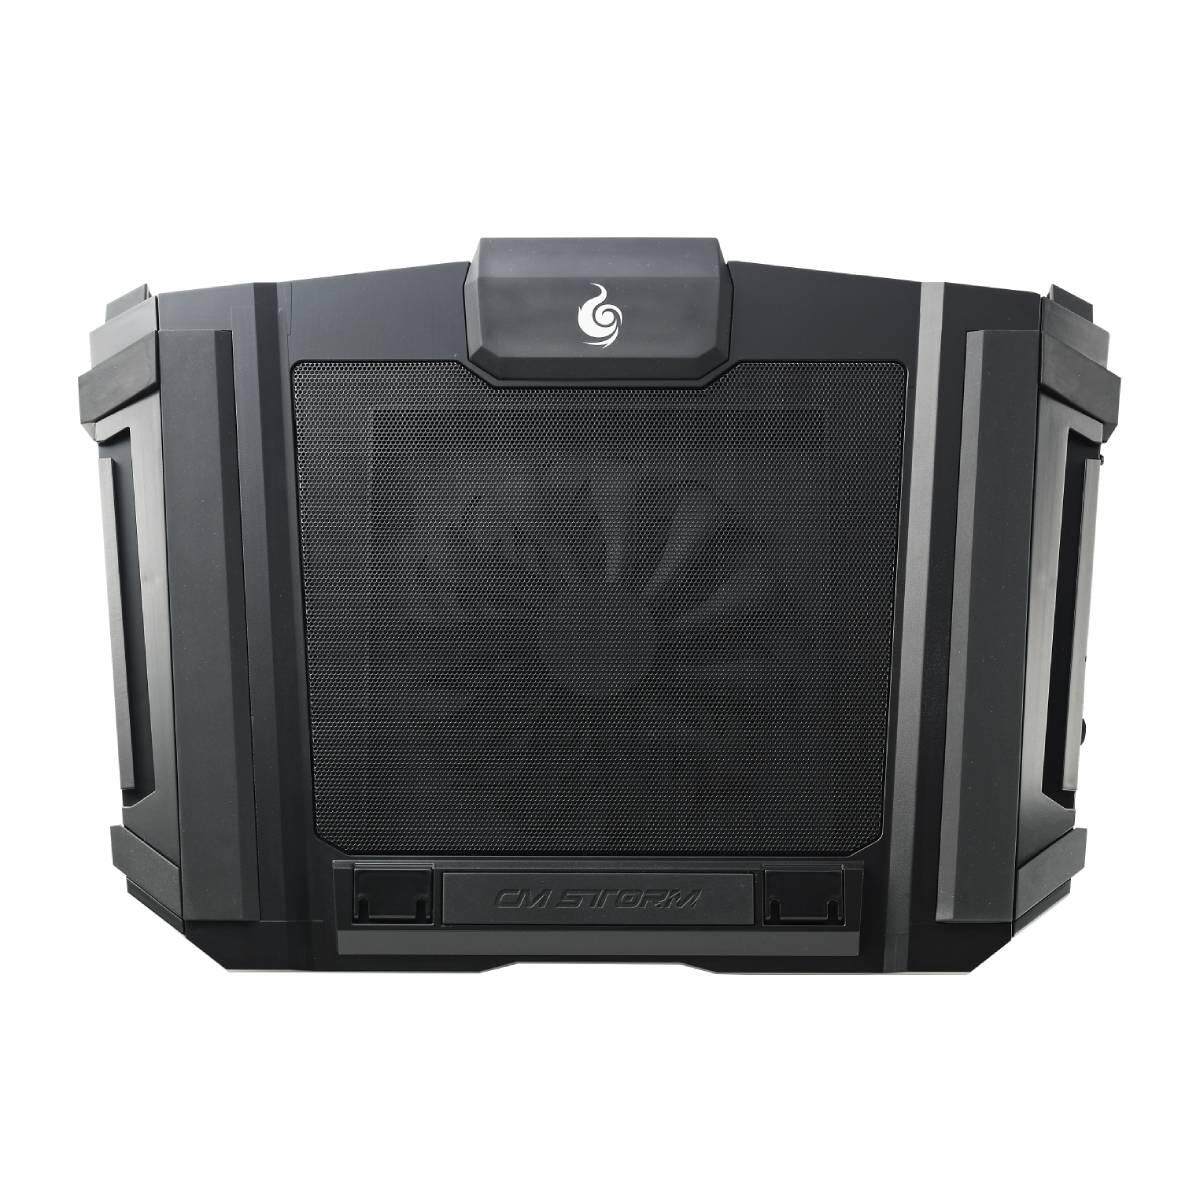 Cooler Master SF-17 180mm Silent Fan Height-Adjustable Ergonomic Mesh 4 USB 2.0 Gaming Notebook Cooler for up to 17